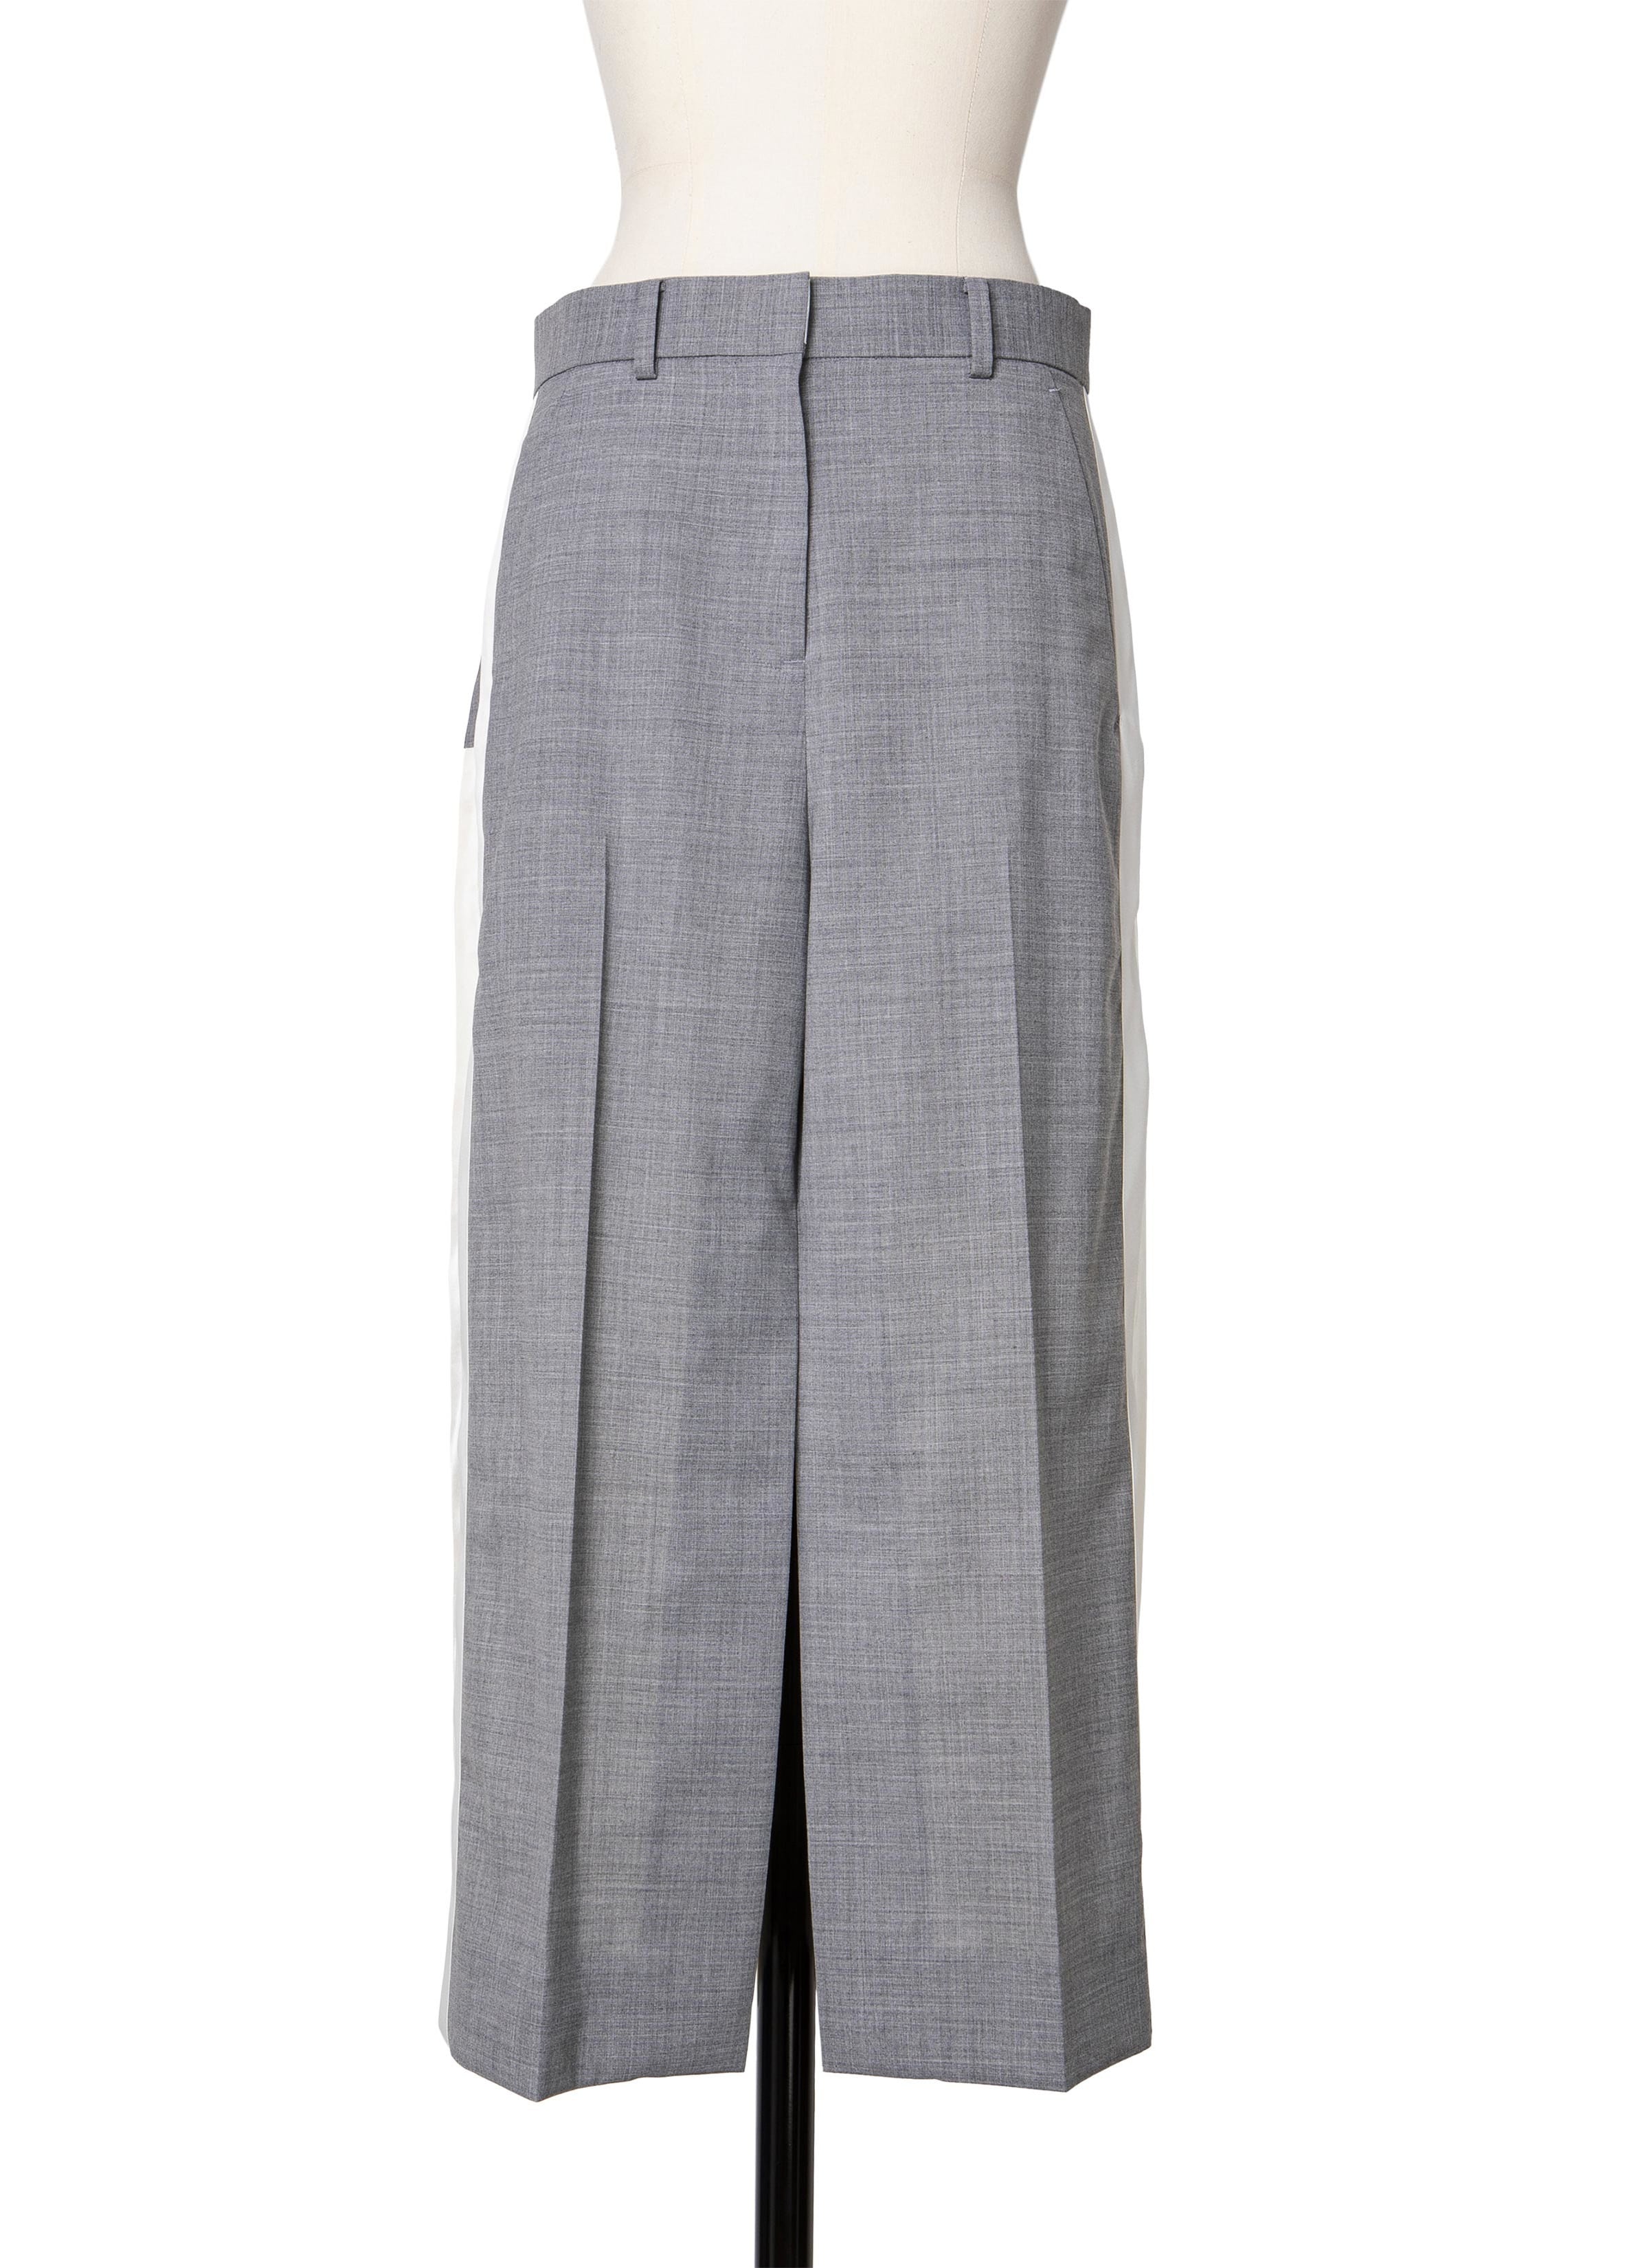 Suiting Mix Skirt 詳細画像 L/GRAY 1